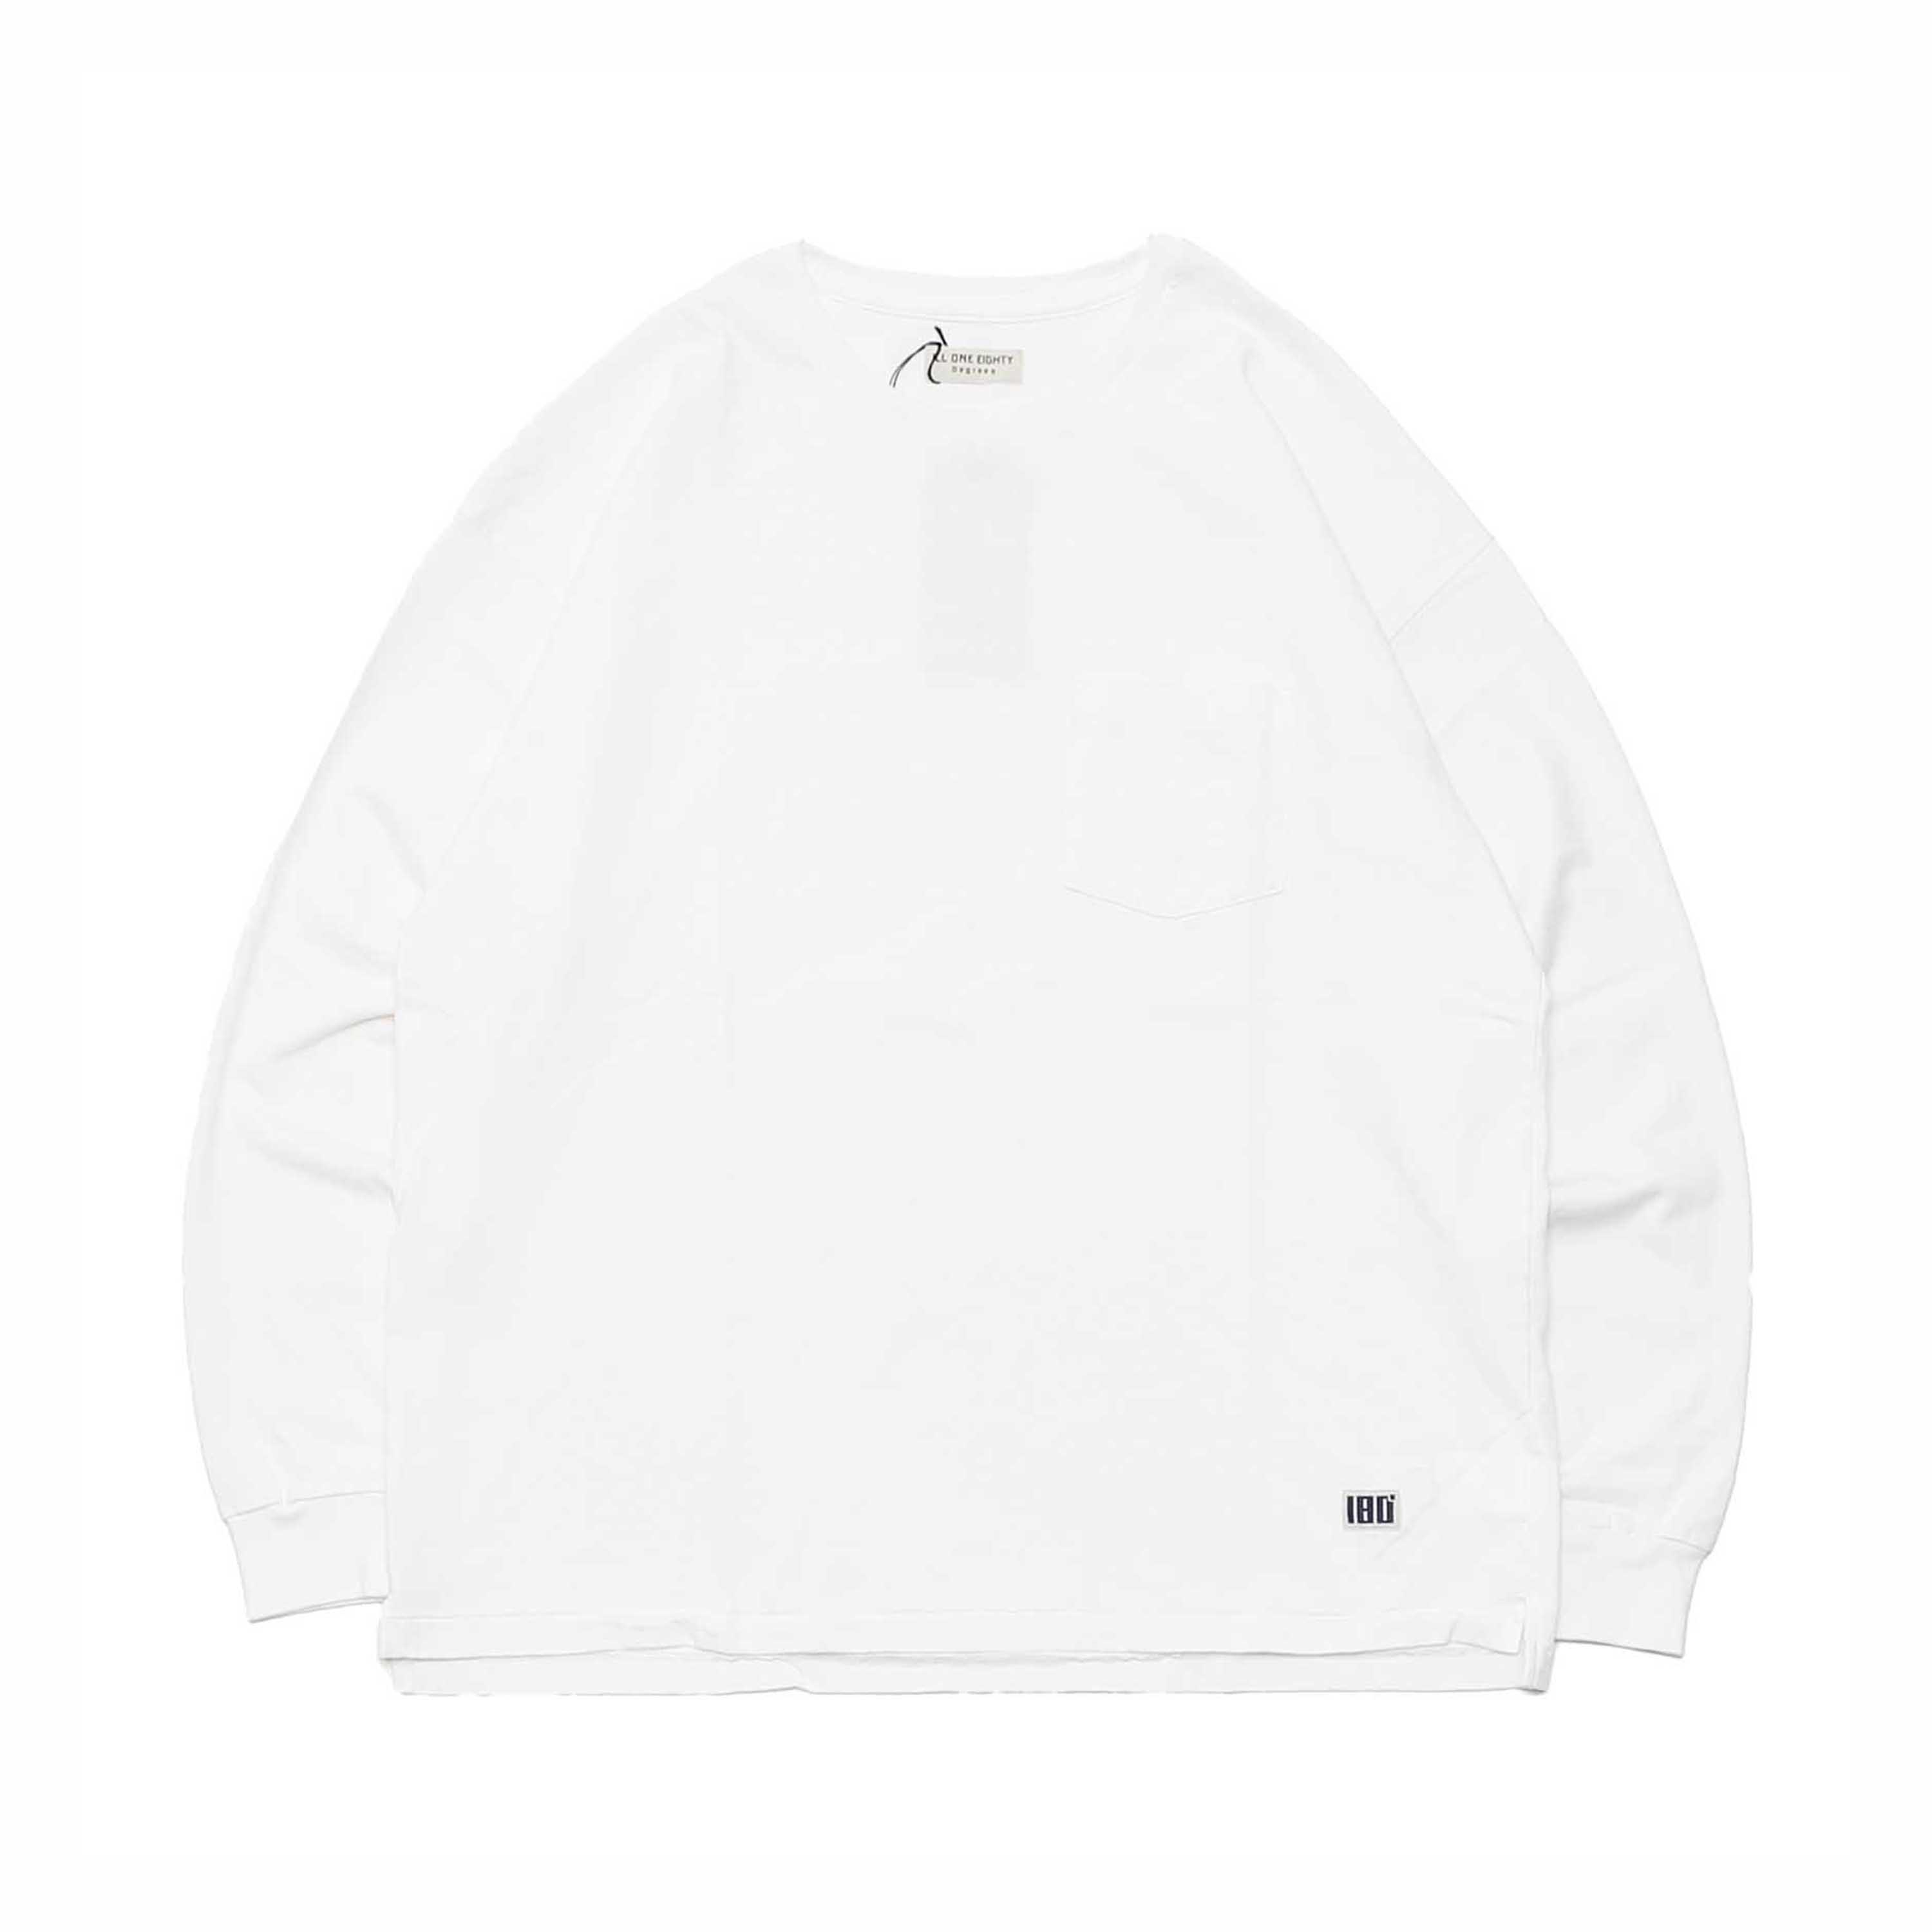 SOLID POCKET L/S TEE - WHITE